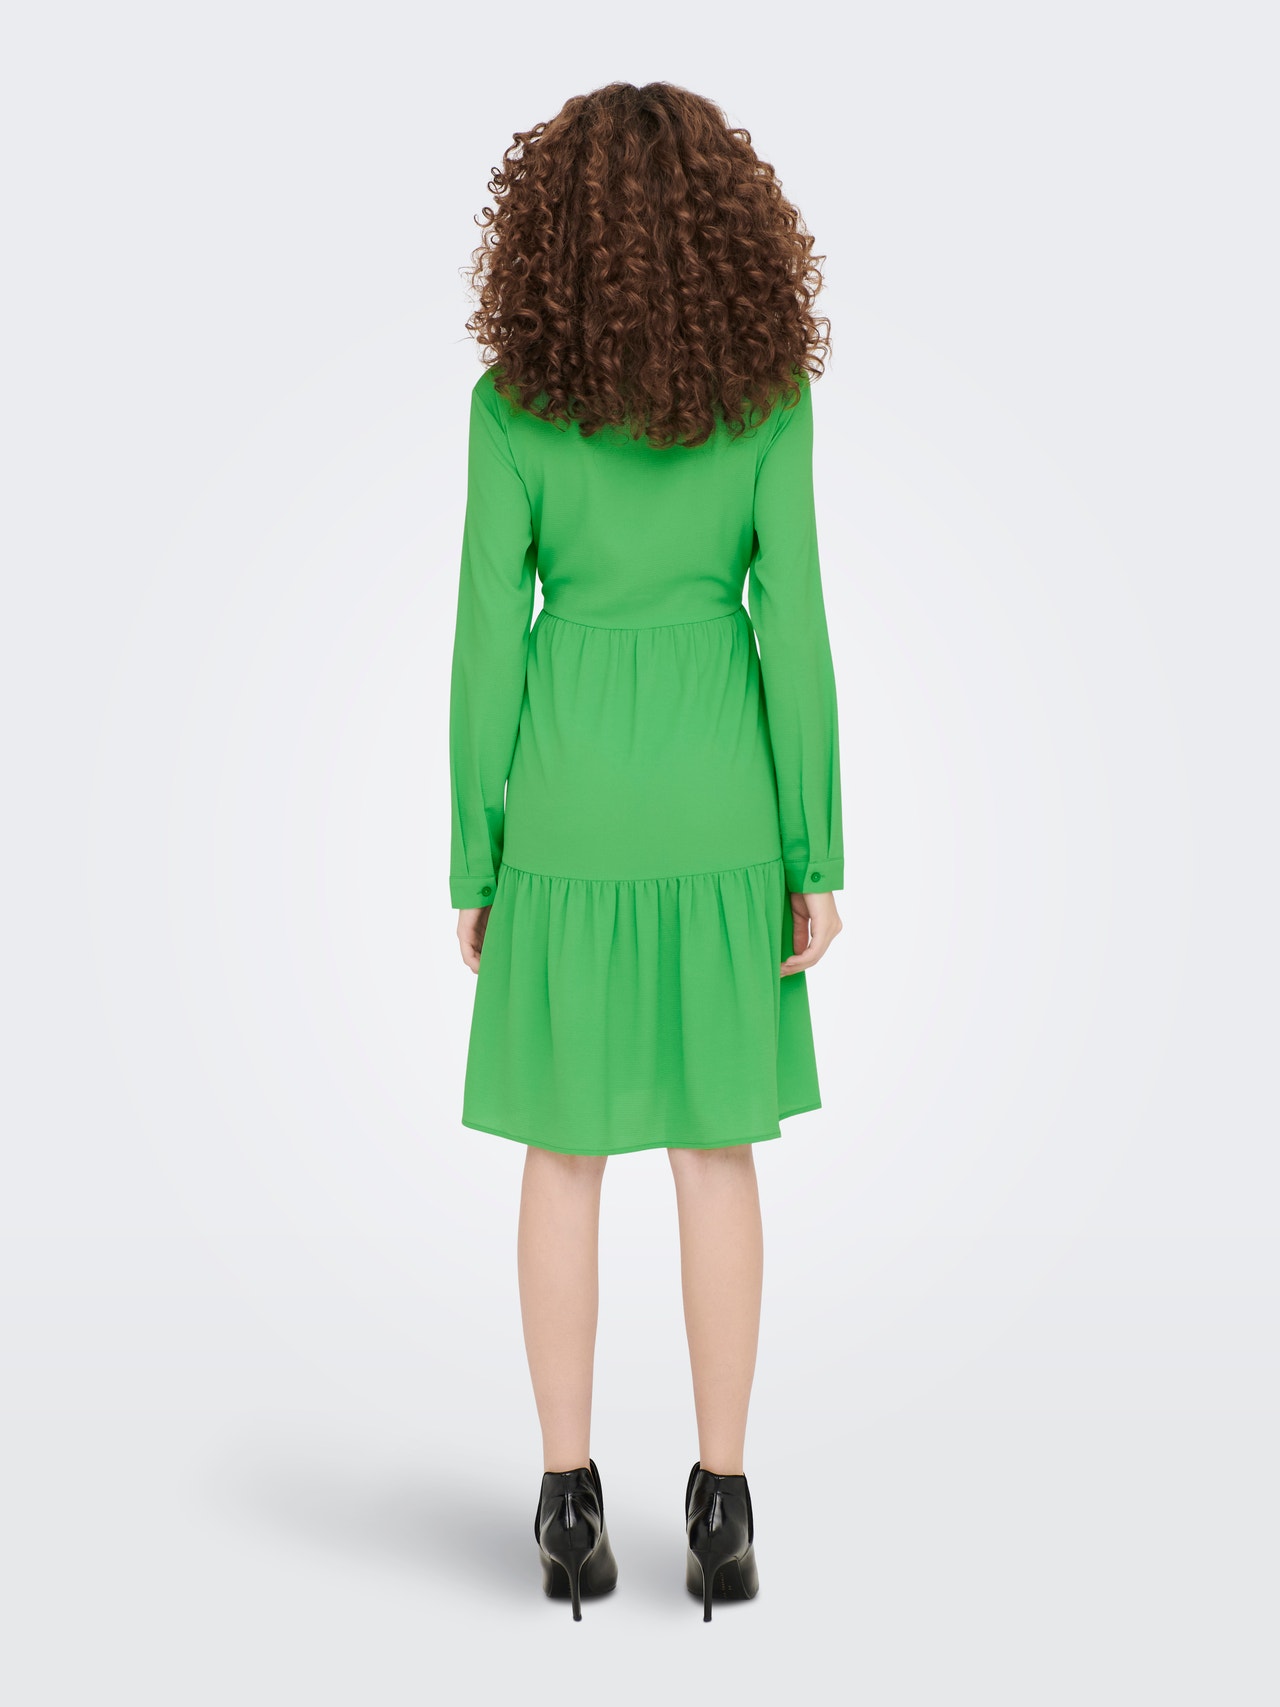 ONLY Regular Fit Round Neck Buttoned cuffs Volume sleeves Long dress -Kelly Green - 15212412